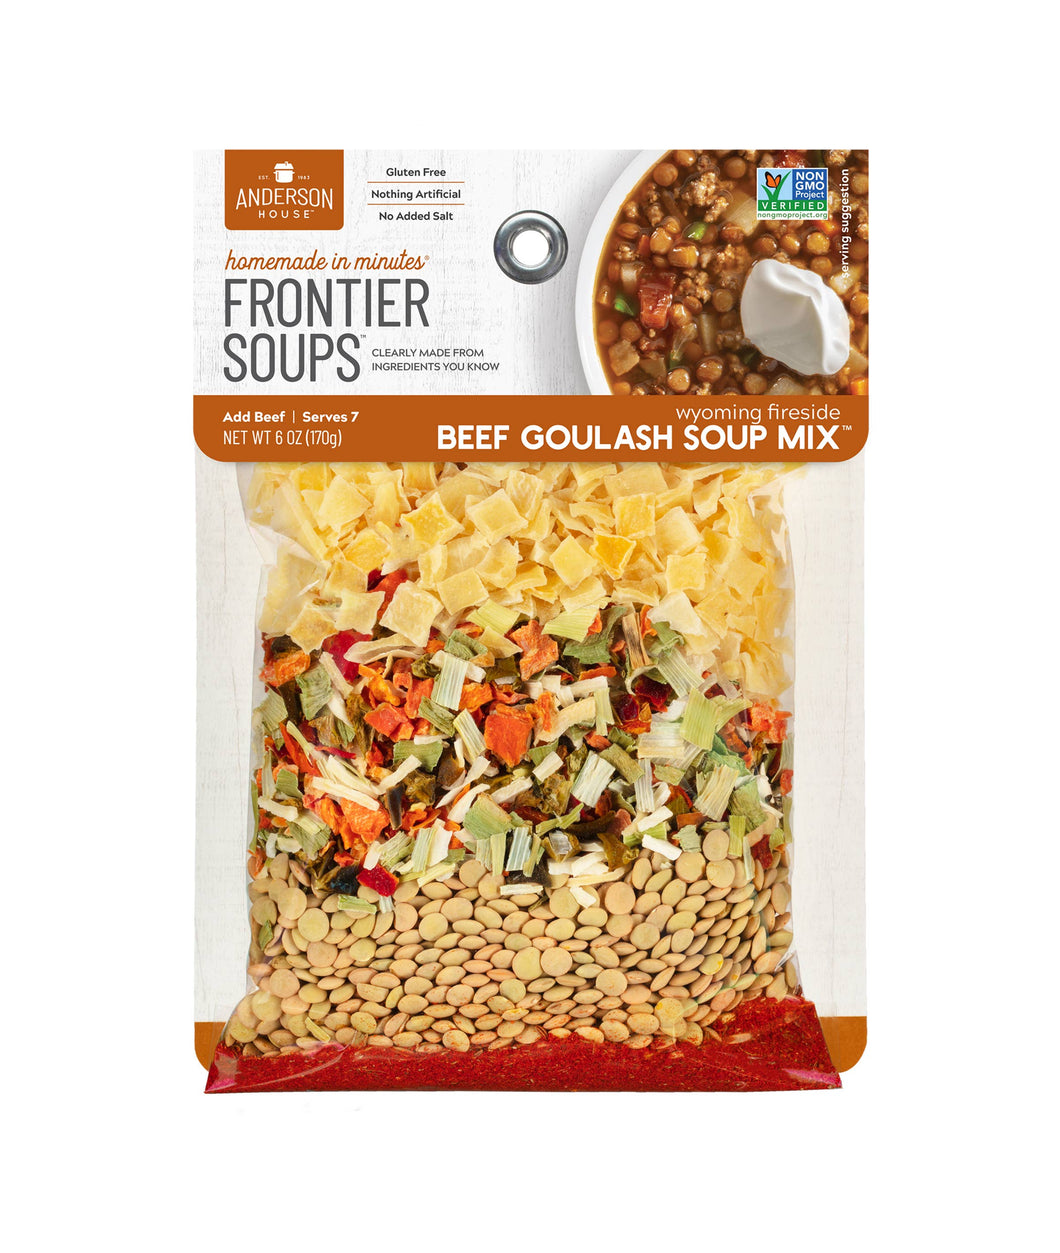 Anderson House Foods  Frontier Soups - Wyoming Fireside Beef Goulash Mix